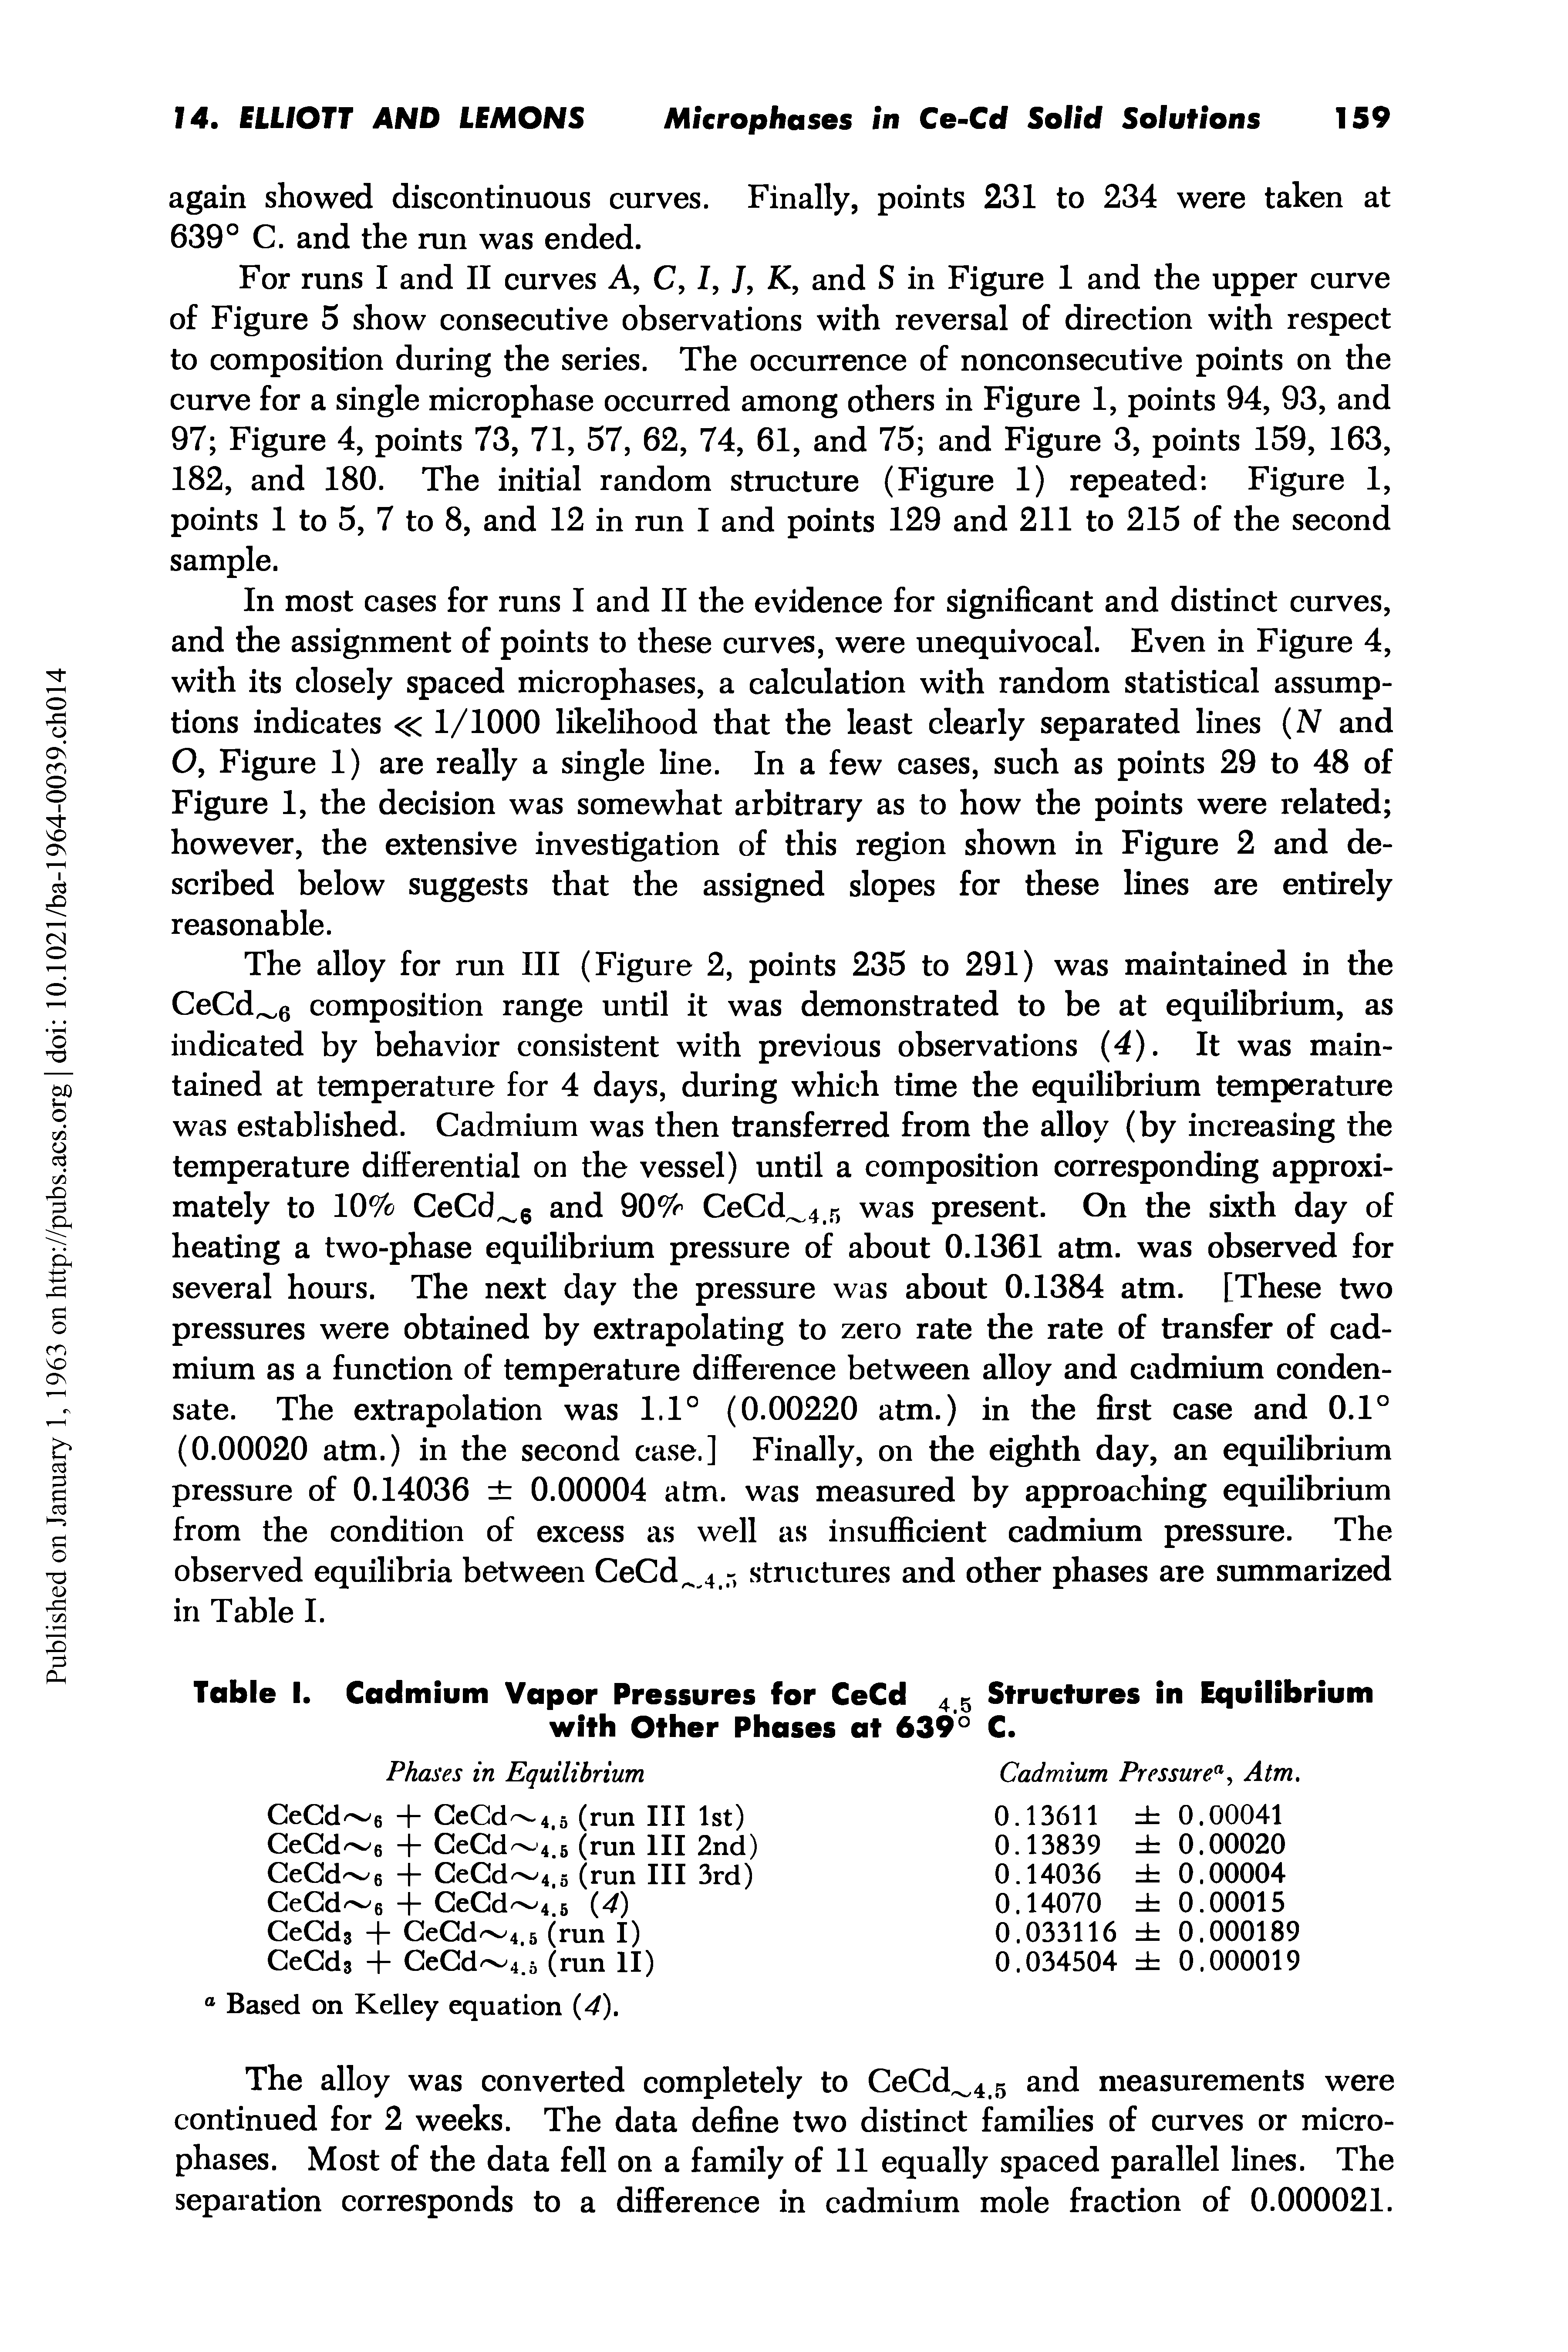 Table I. Cadmium Vapor Pressures for CeCd 45 Structures in Equilibrium with Other Phases at 639° C.